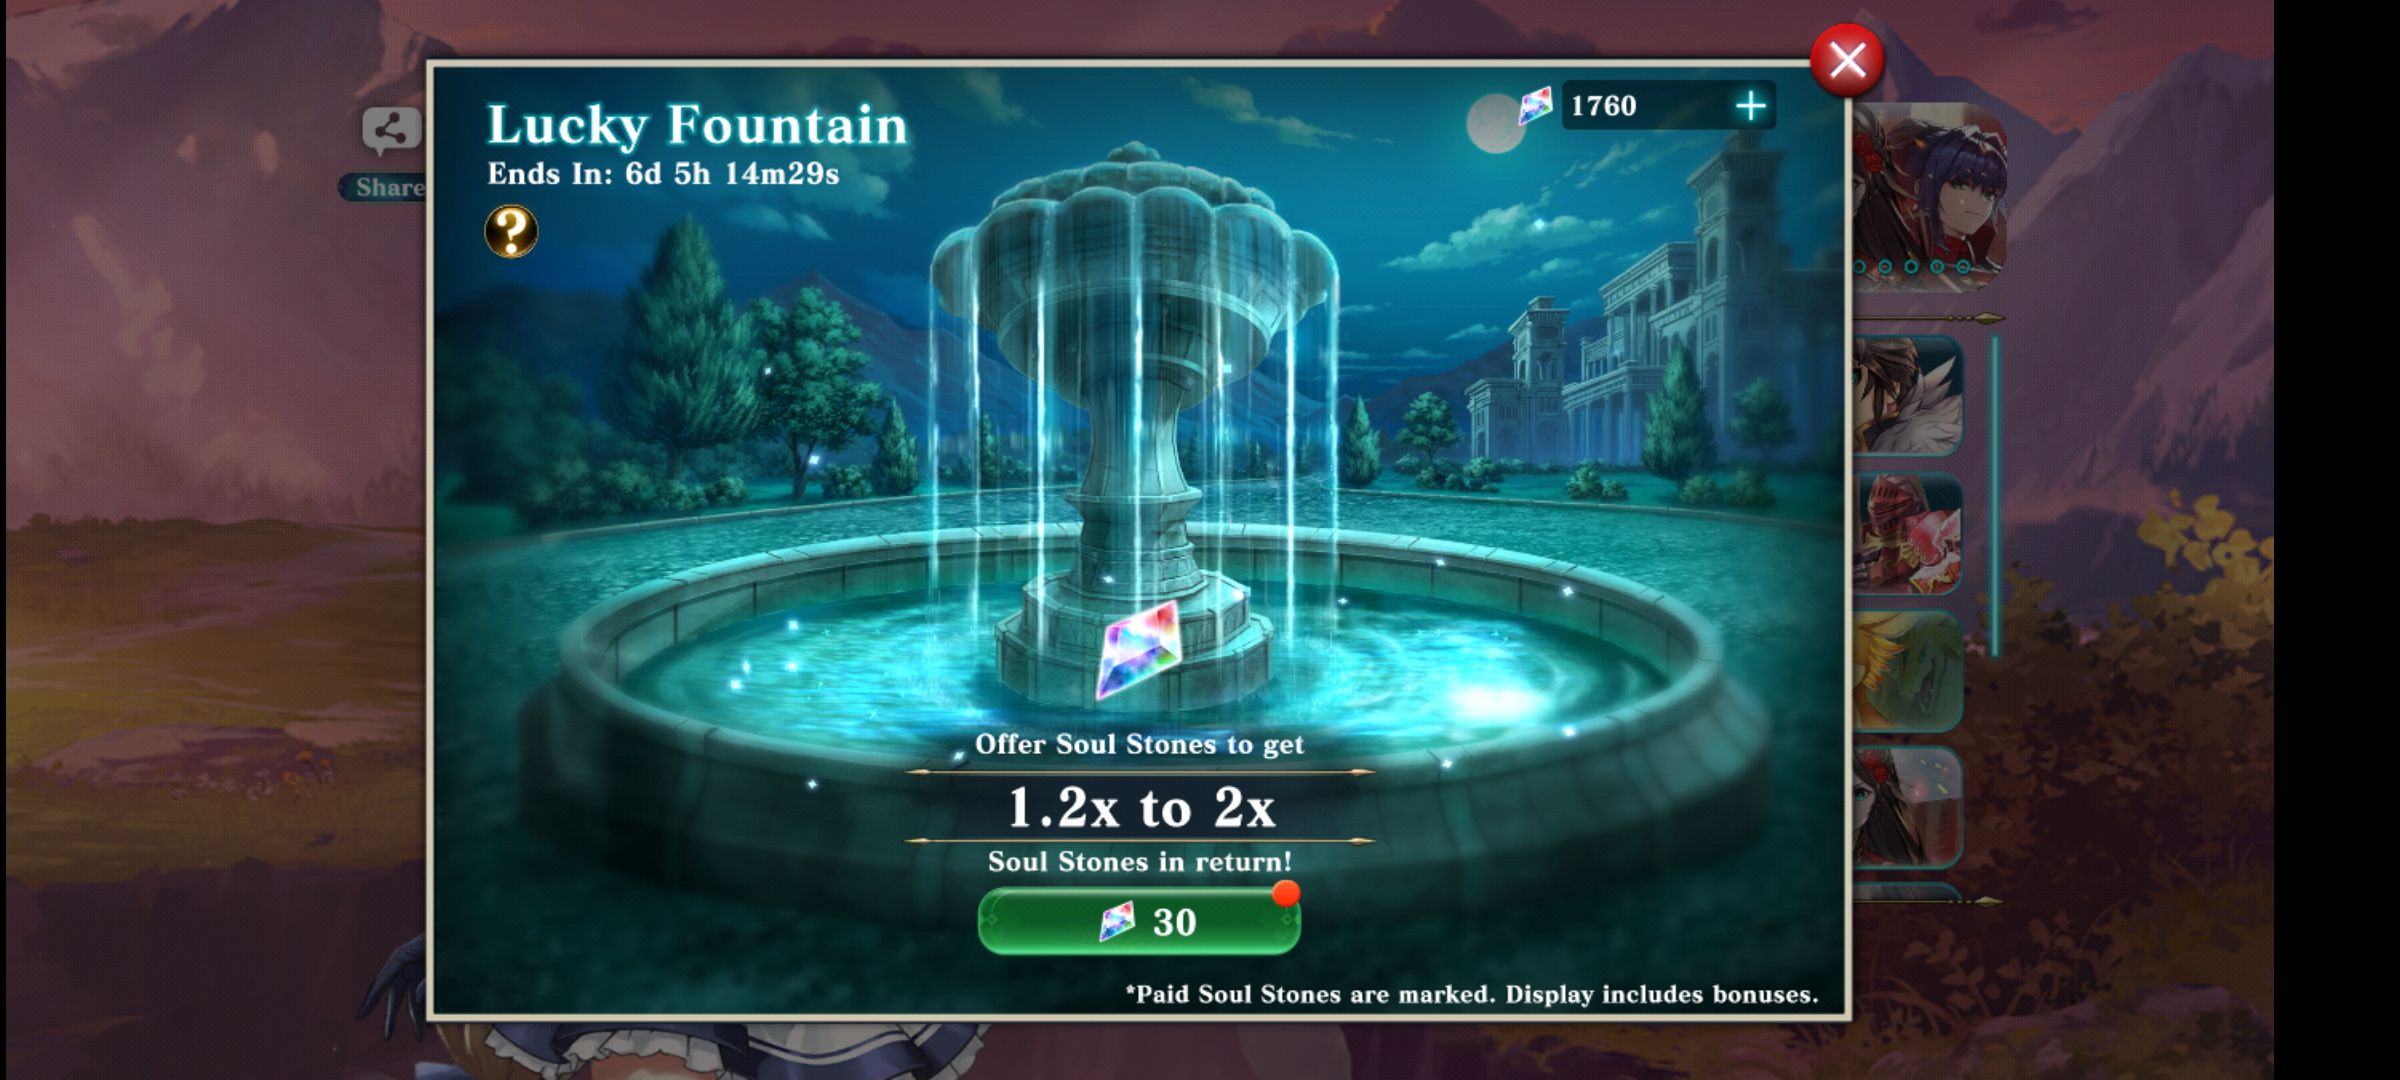 Access to Evertale's Lucky Fountain